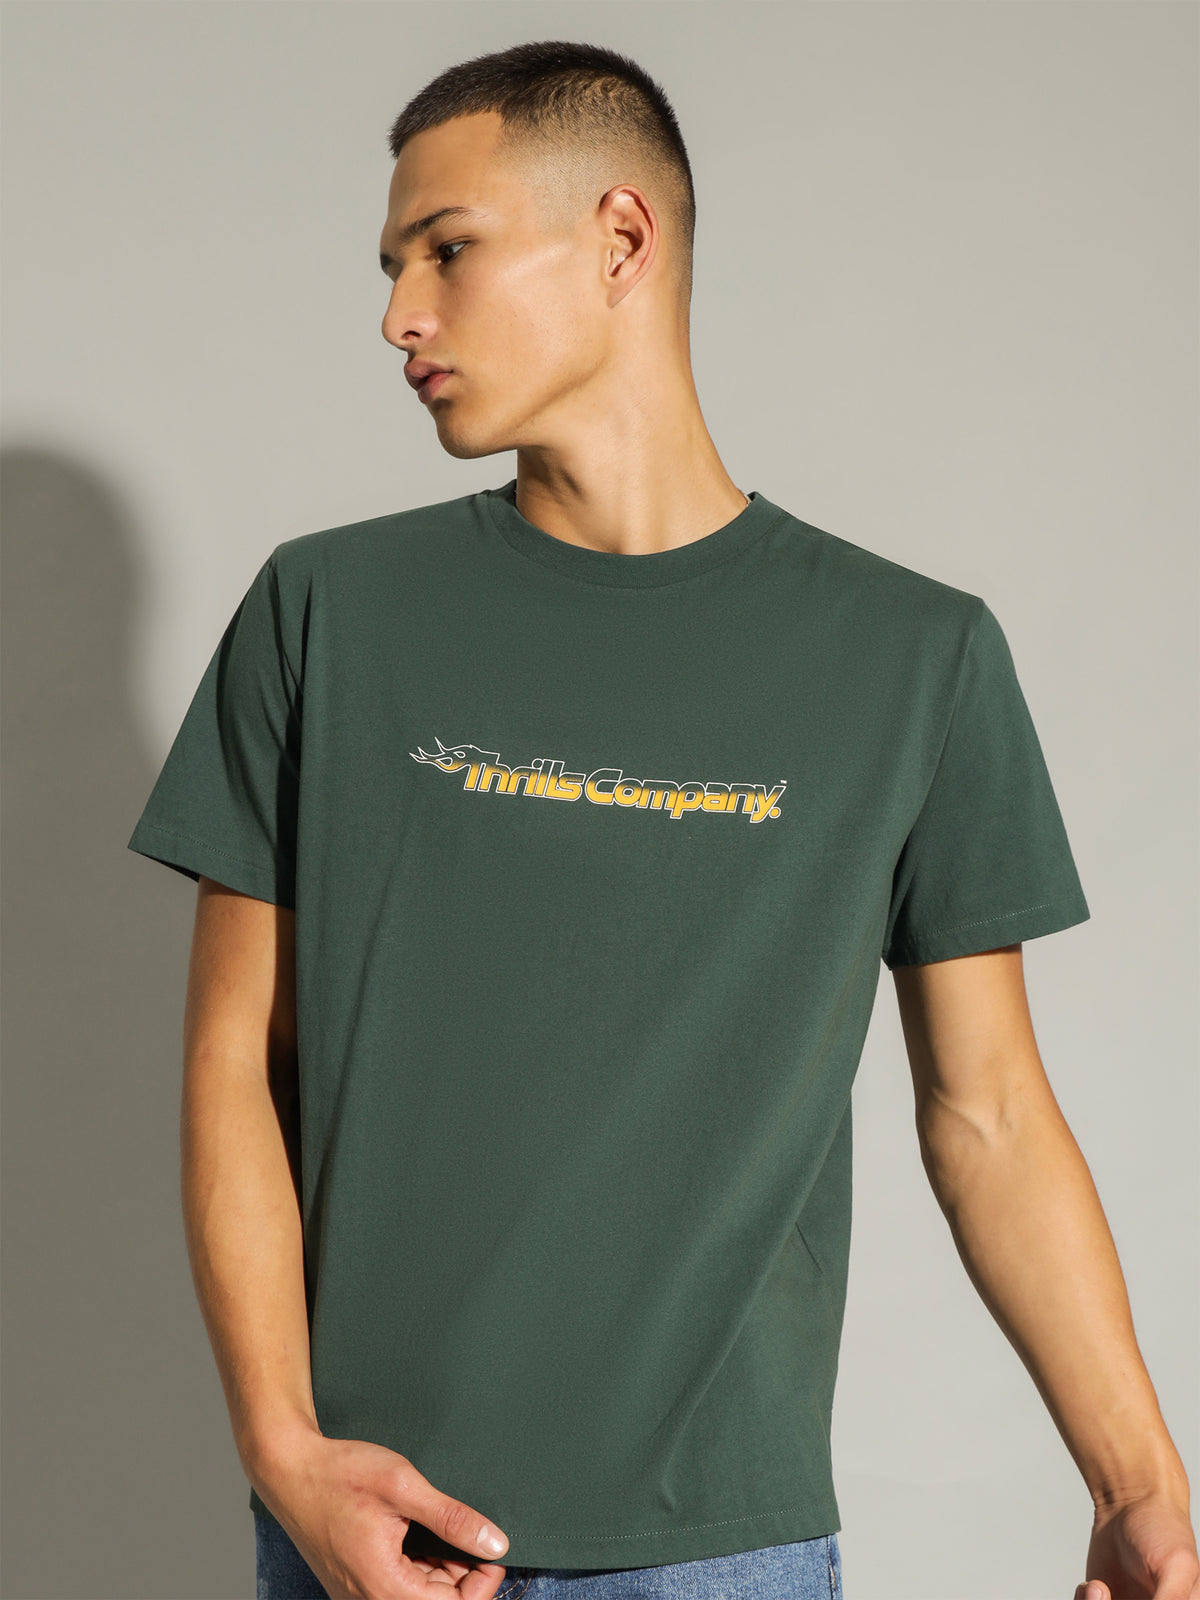 Healer Merch Fit T-Shirt in Sycamore